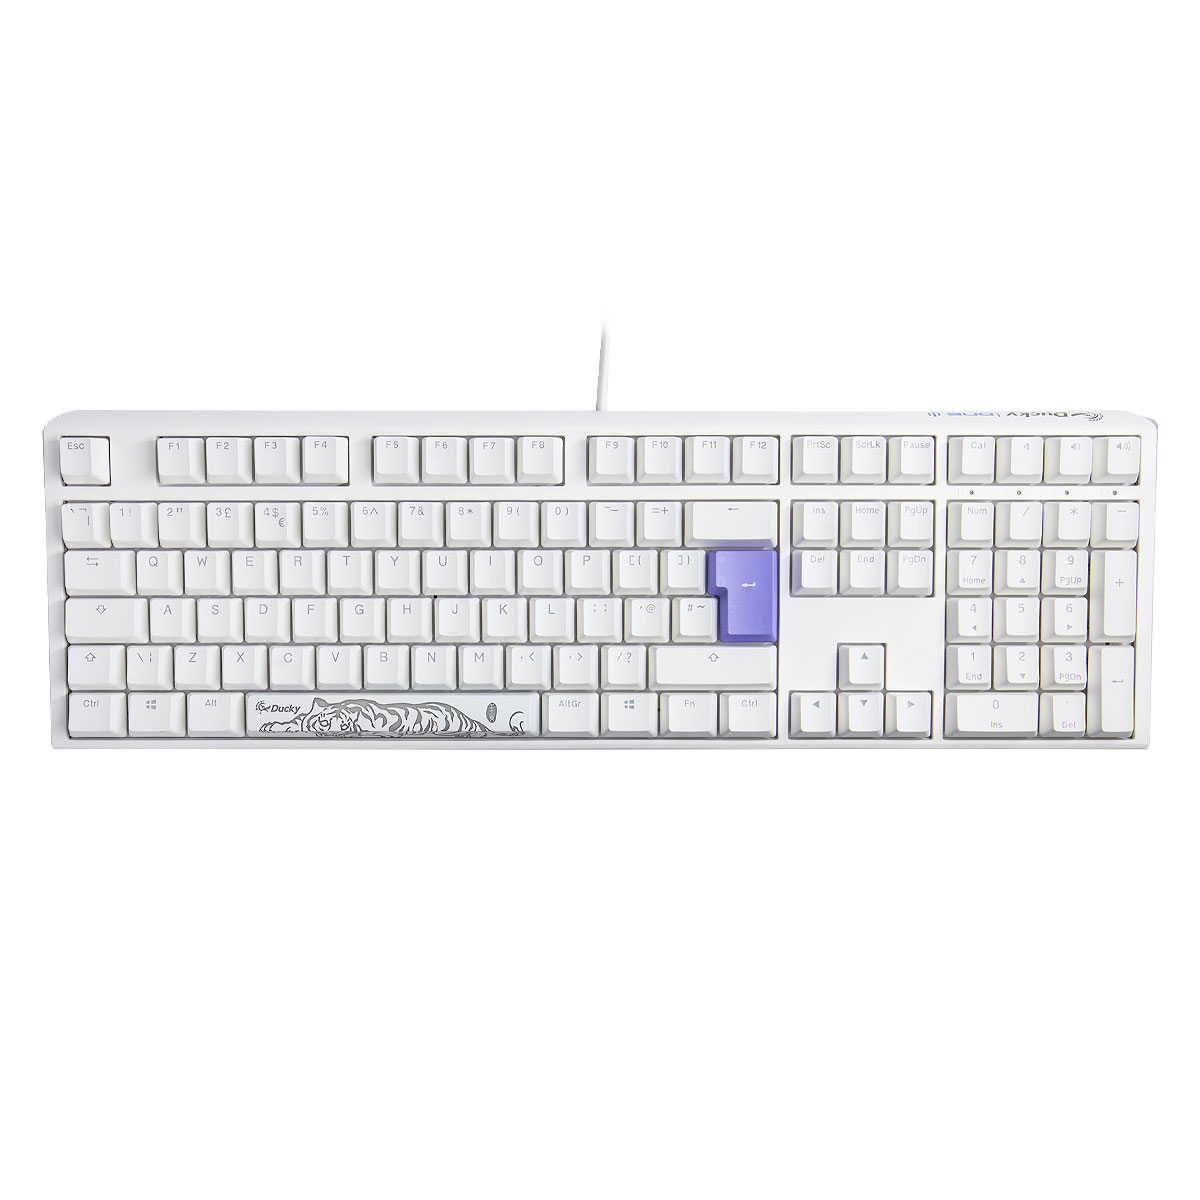 Ducky - Ducky One 3 Classic Fullsize USB RGB Mechanical Gaming Keyboard Cherry Brown - Pure White UK Layout